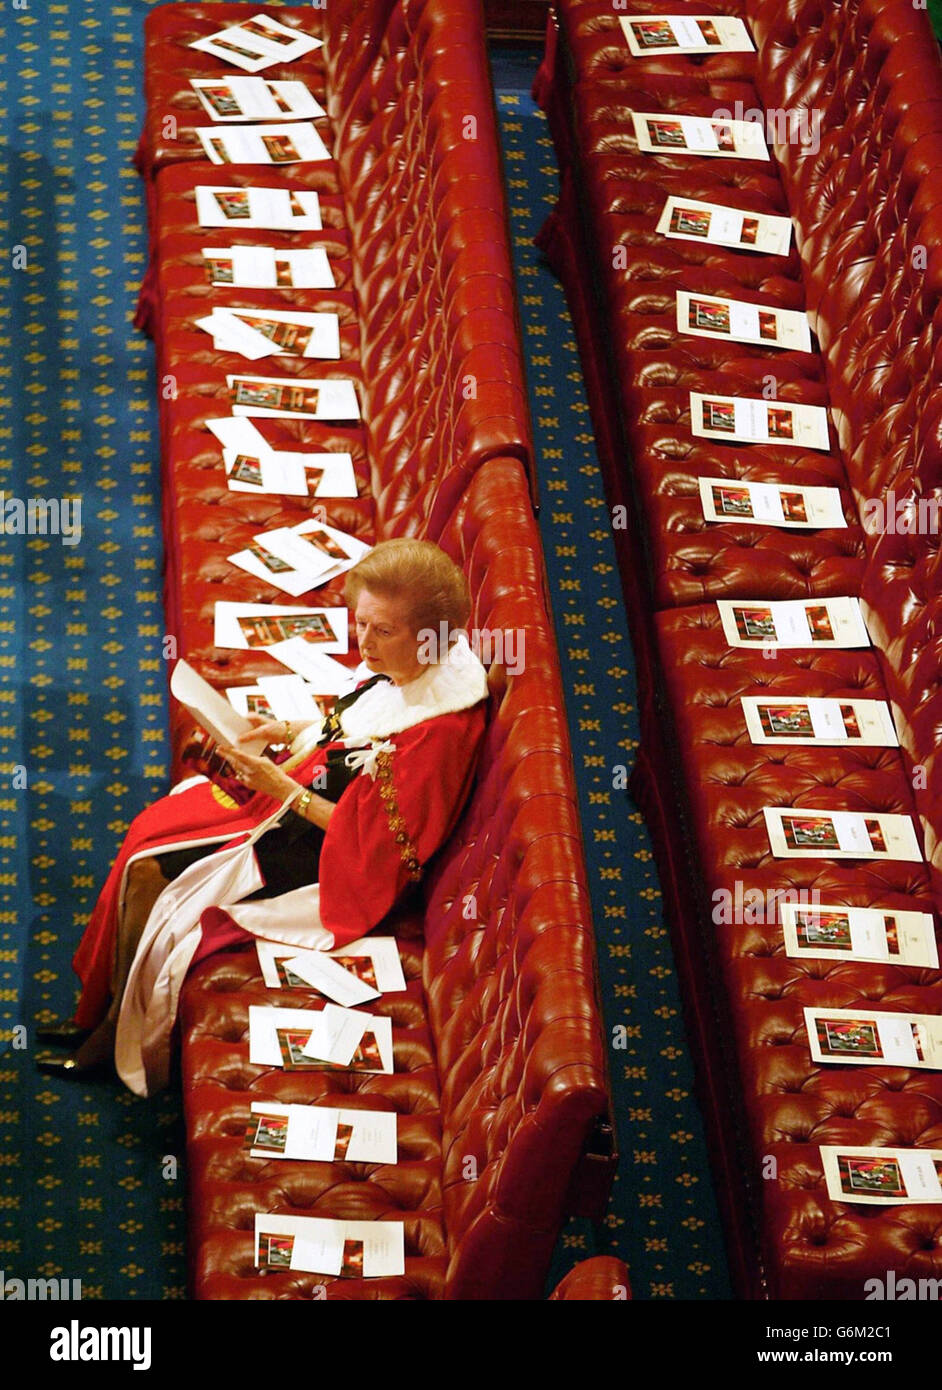 Britain's former Prime Minister Baroness Thatcher sits alone as she waits for the start of the State Opening of Parliament at the Palace of Westminster in London. Stock Photo